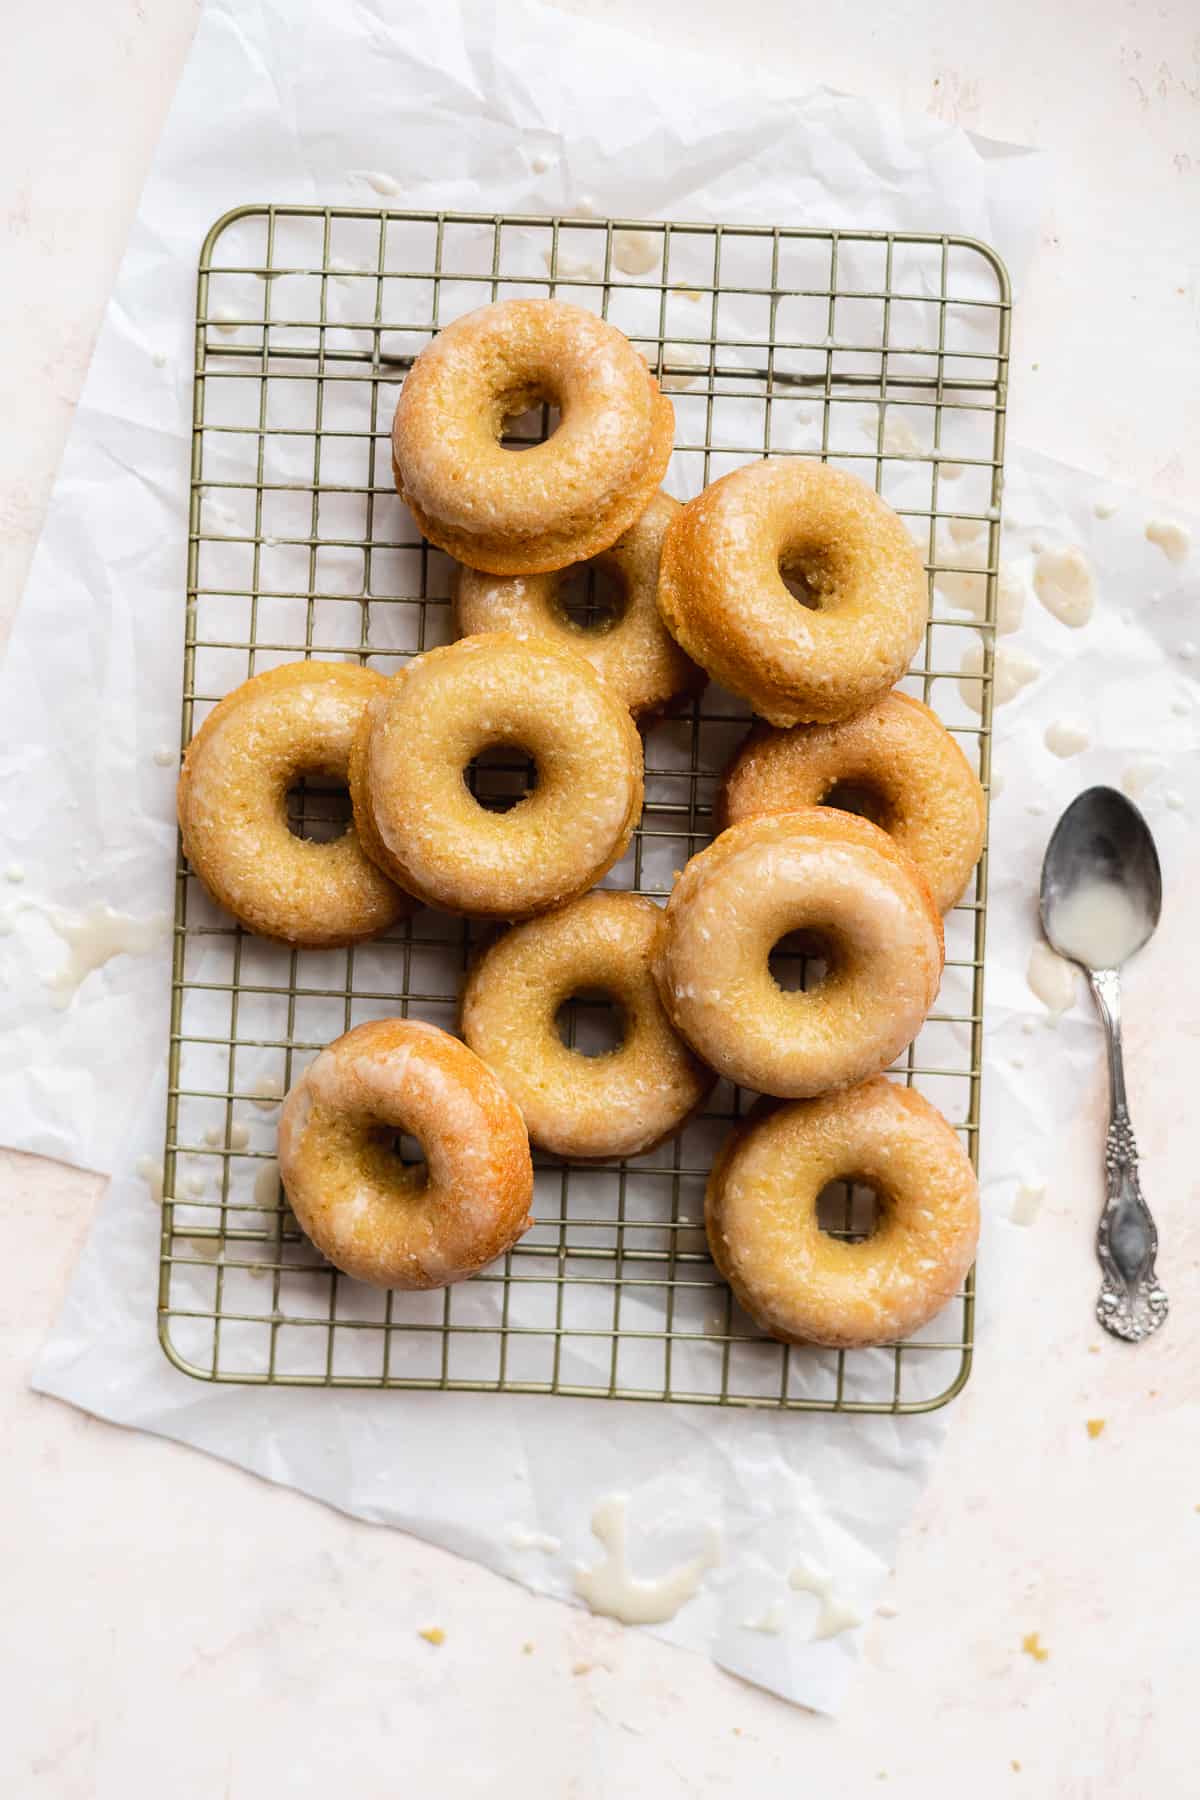 Glazed donuts piled on a wire rack with white paper underneath and a spoon on the side.